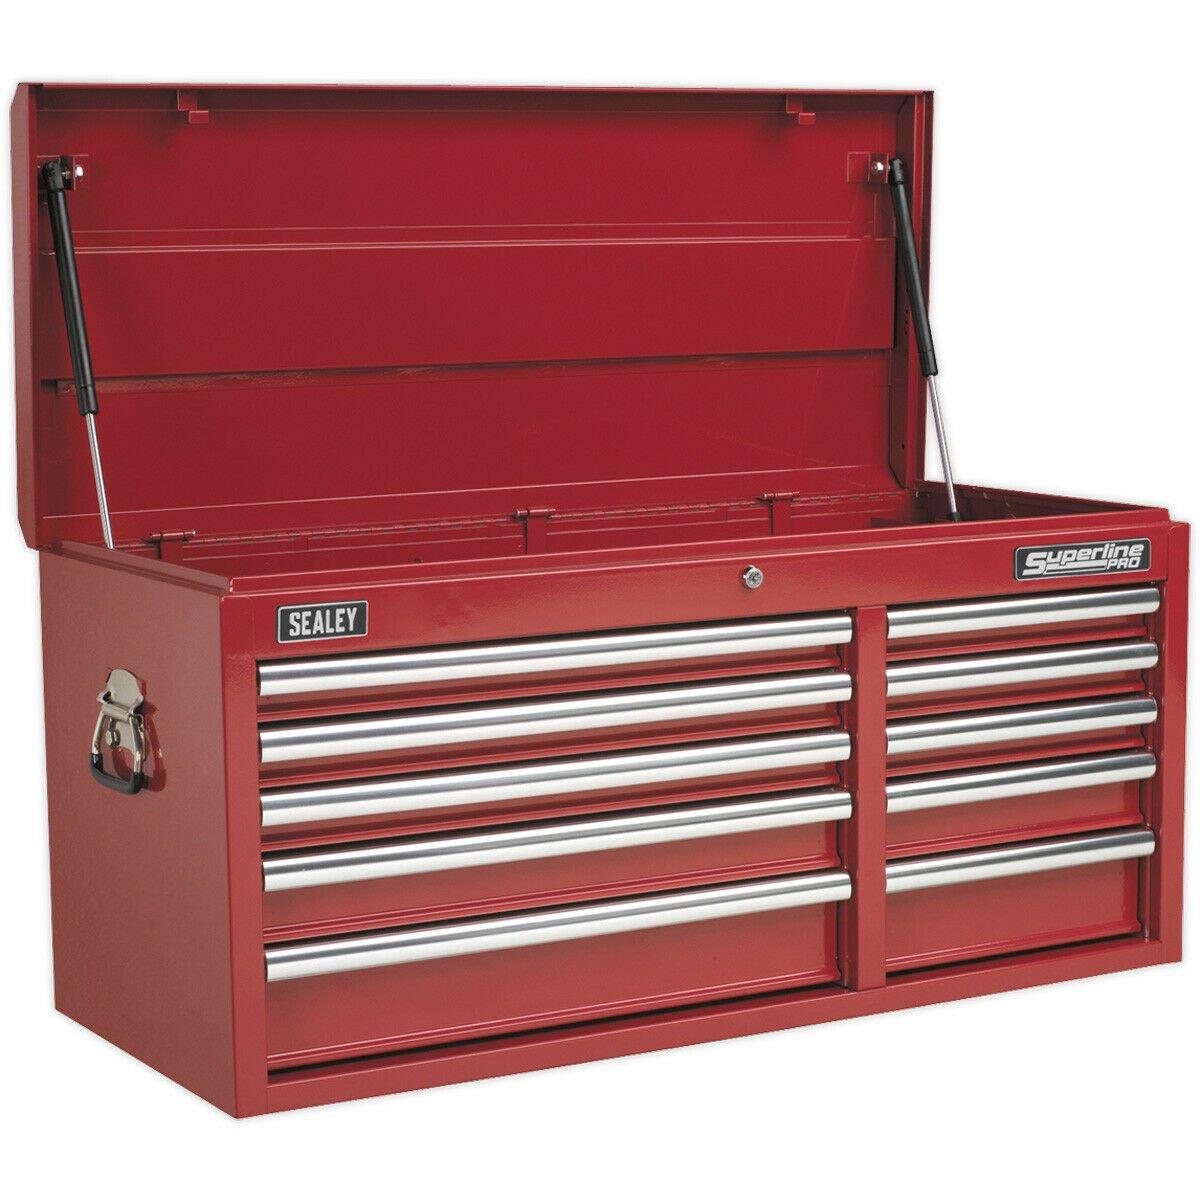 1025 x 435 x 495mm RED 10 Drawer Topchest Tool Chest Lockable Storage Cabinet